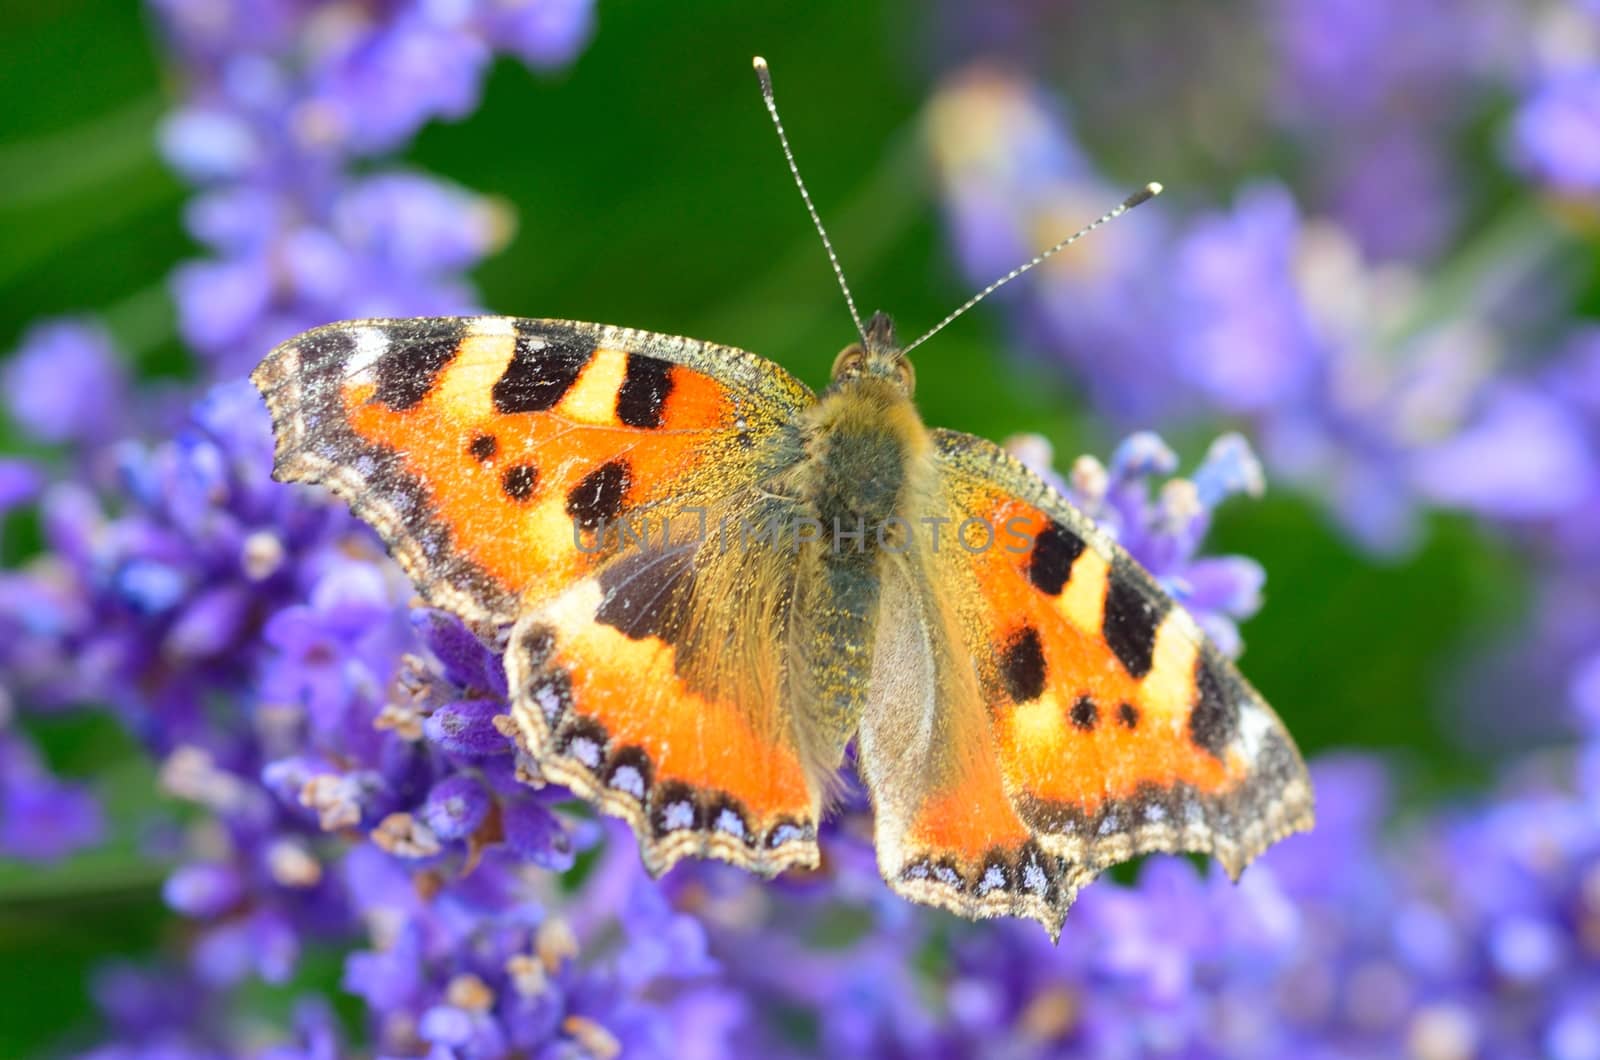 Painted lady butterfly on lavender flower